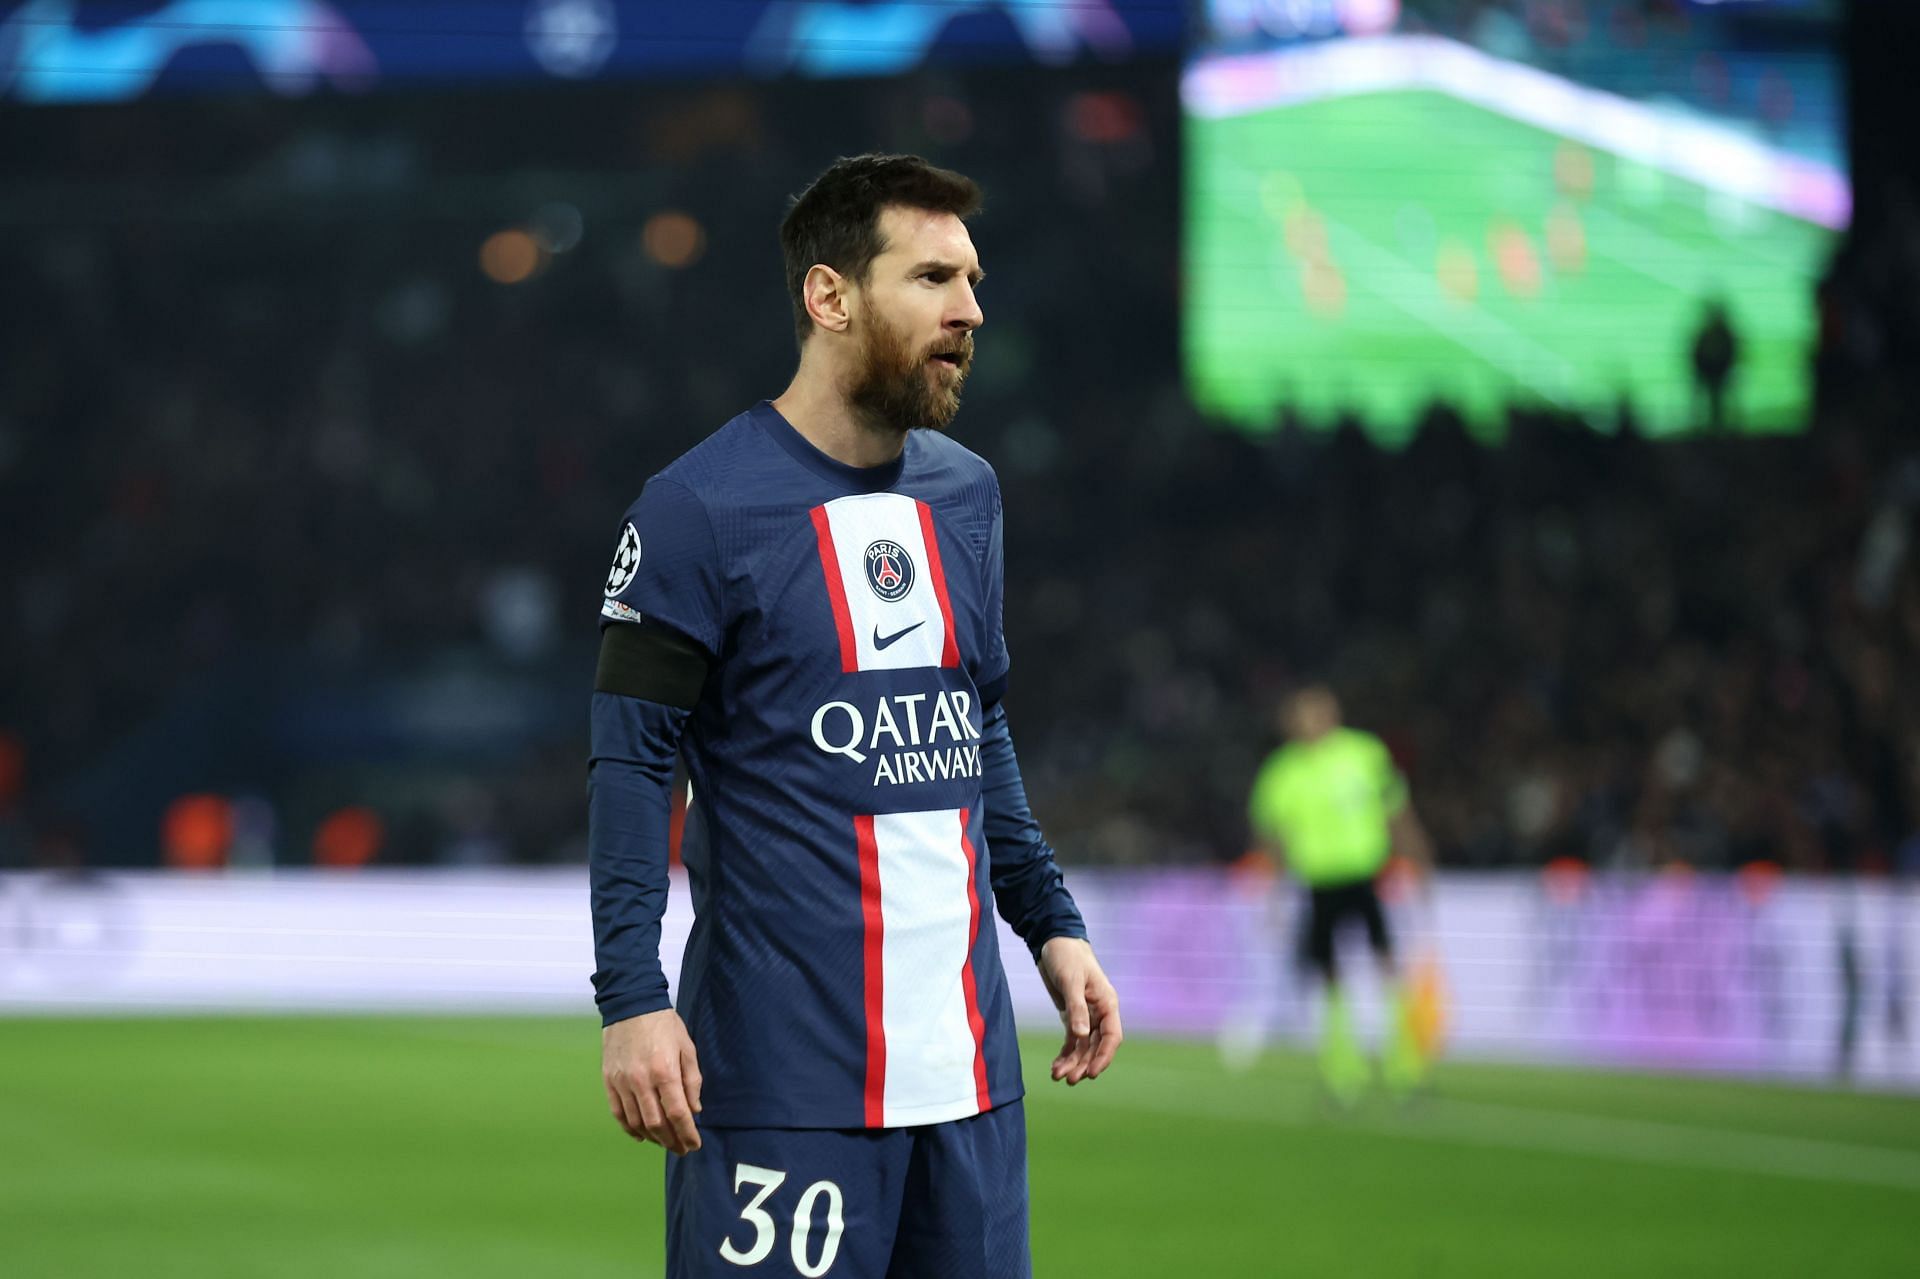 The PSG superstar has come under fire.